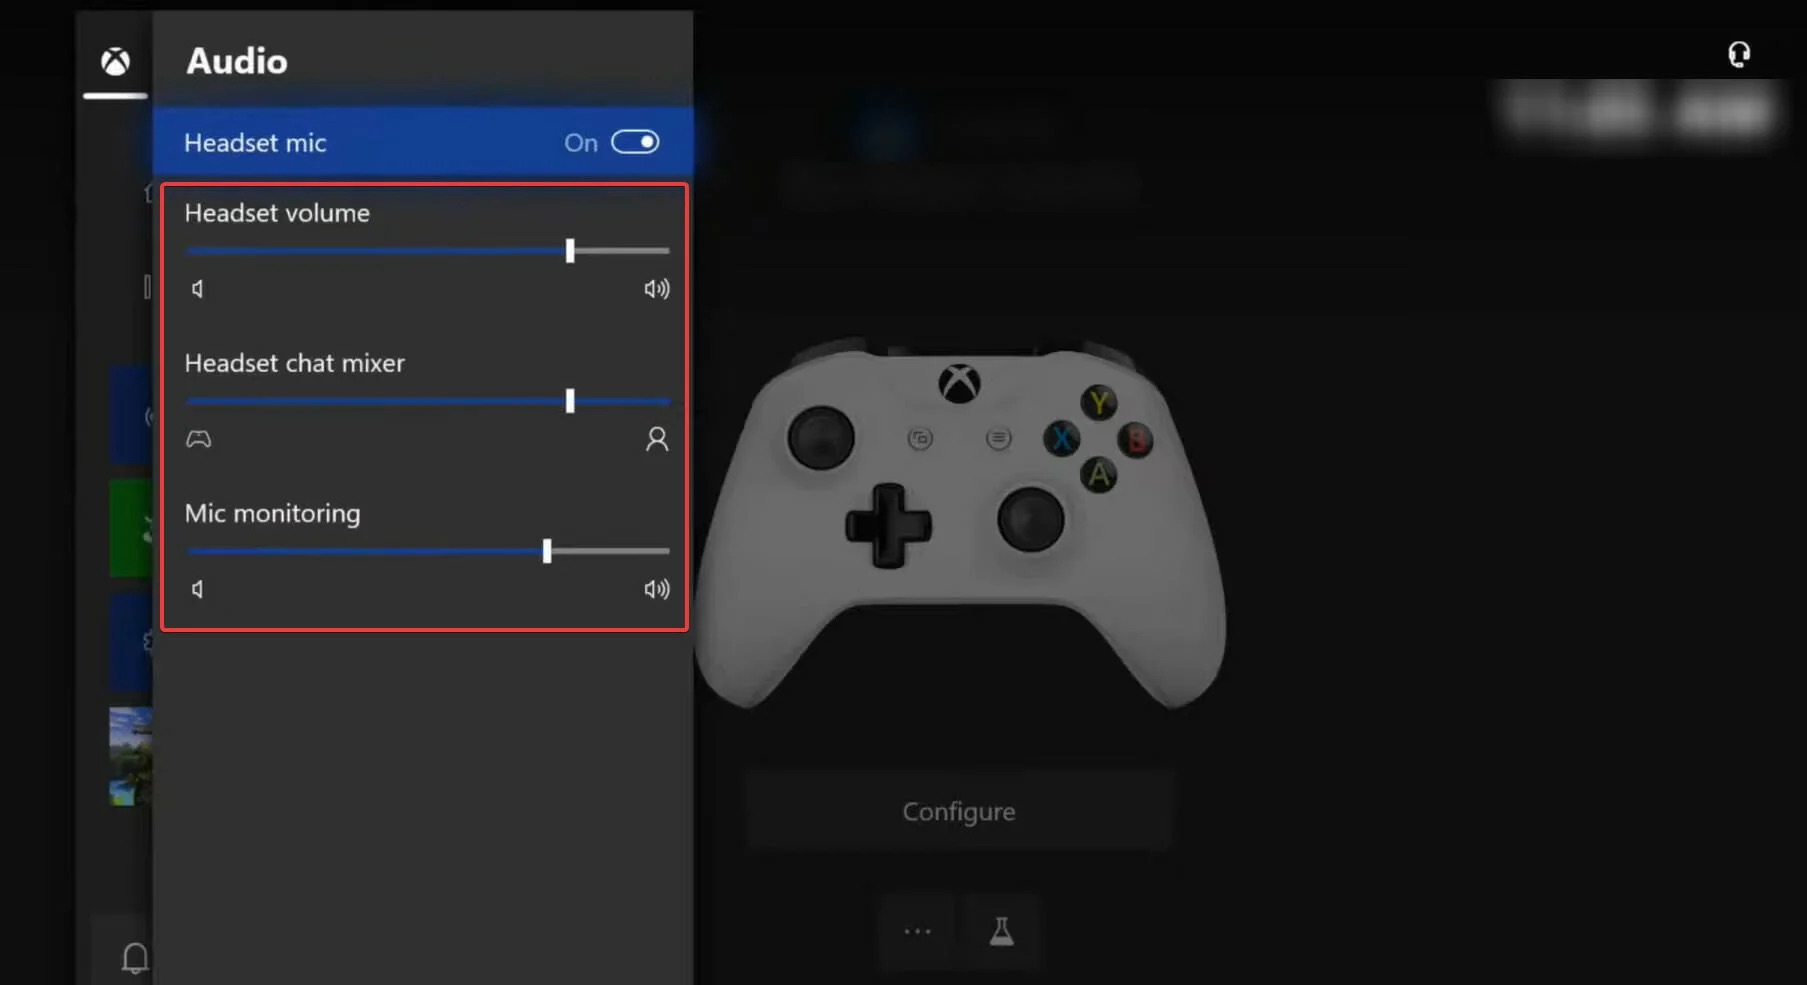 Xbox One Mic Monitoring: A Quick Guide